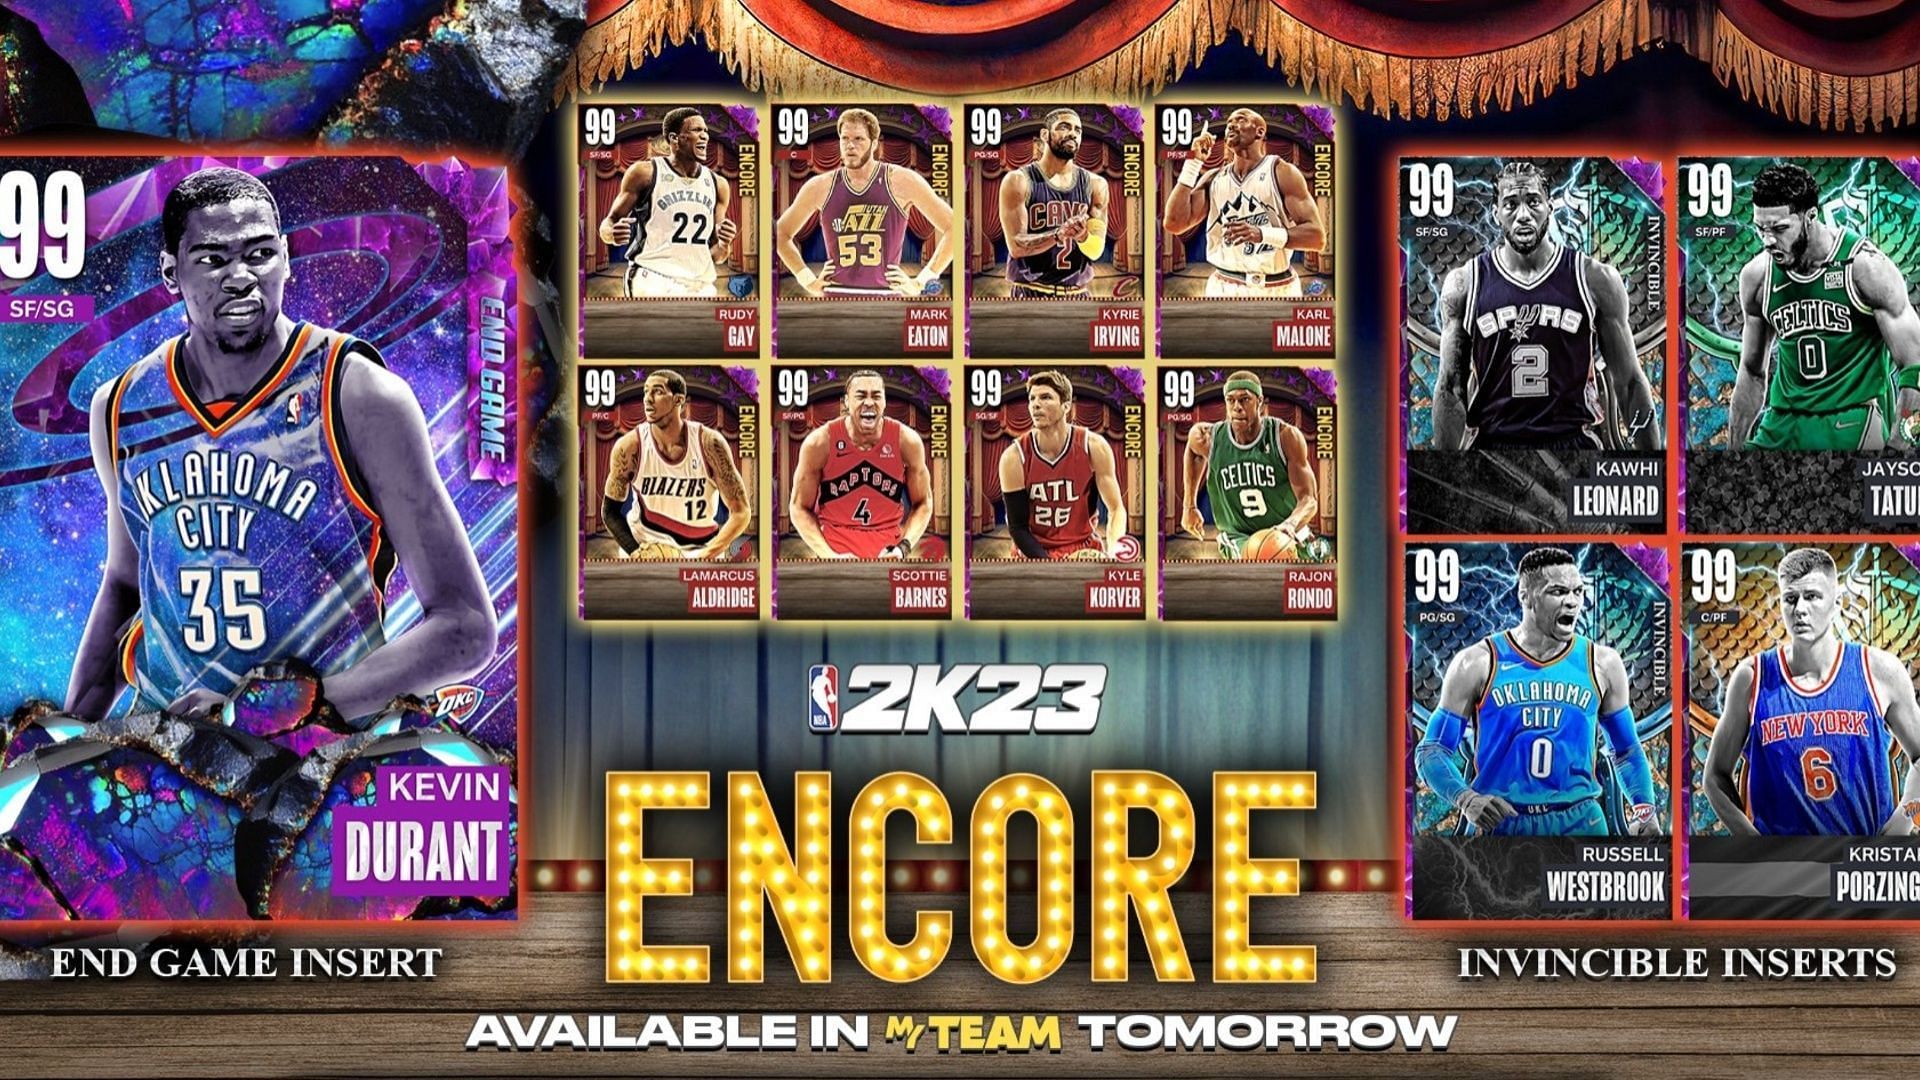 A new series of cards will be released in MyTeam (Image via 2K)